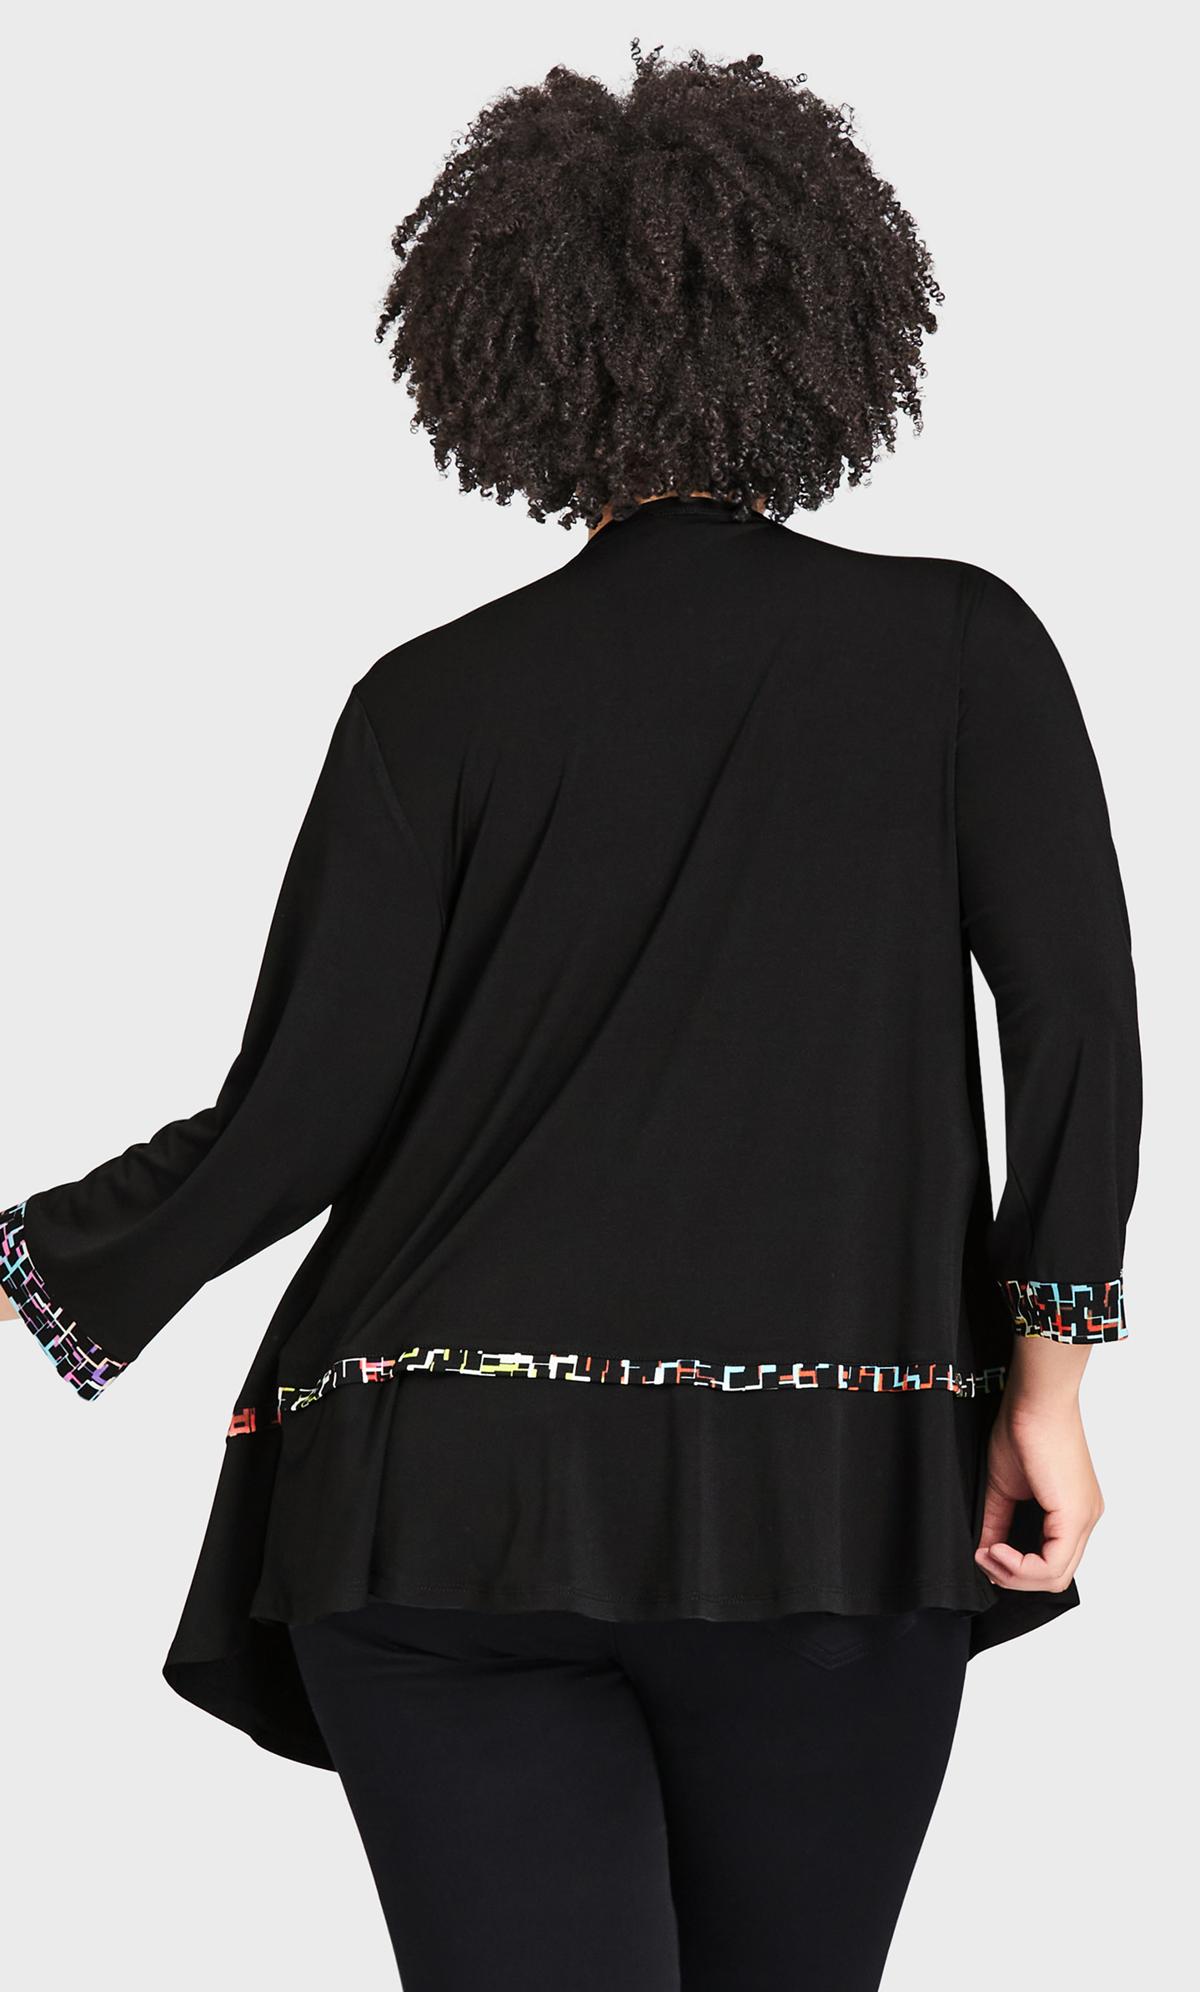 Plus Size Abstract Duet Top Jigsaw Multicolour Print Attached Black Cardigan 3